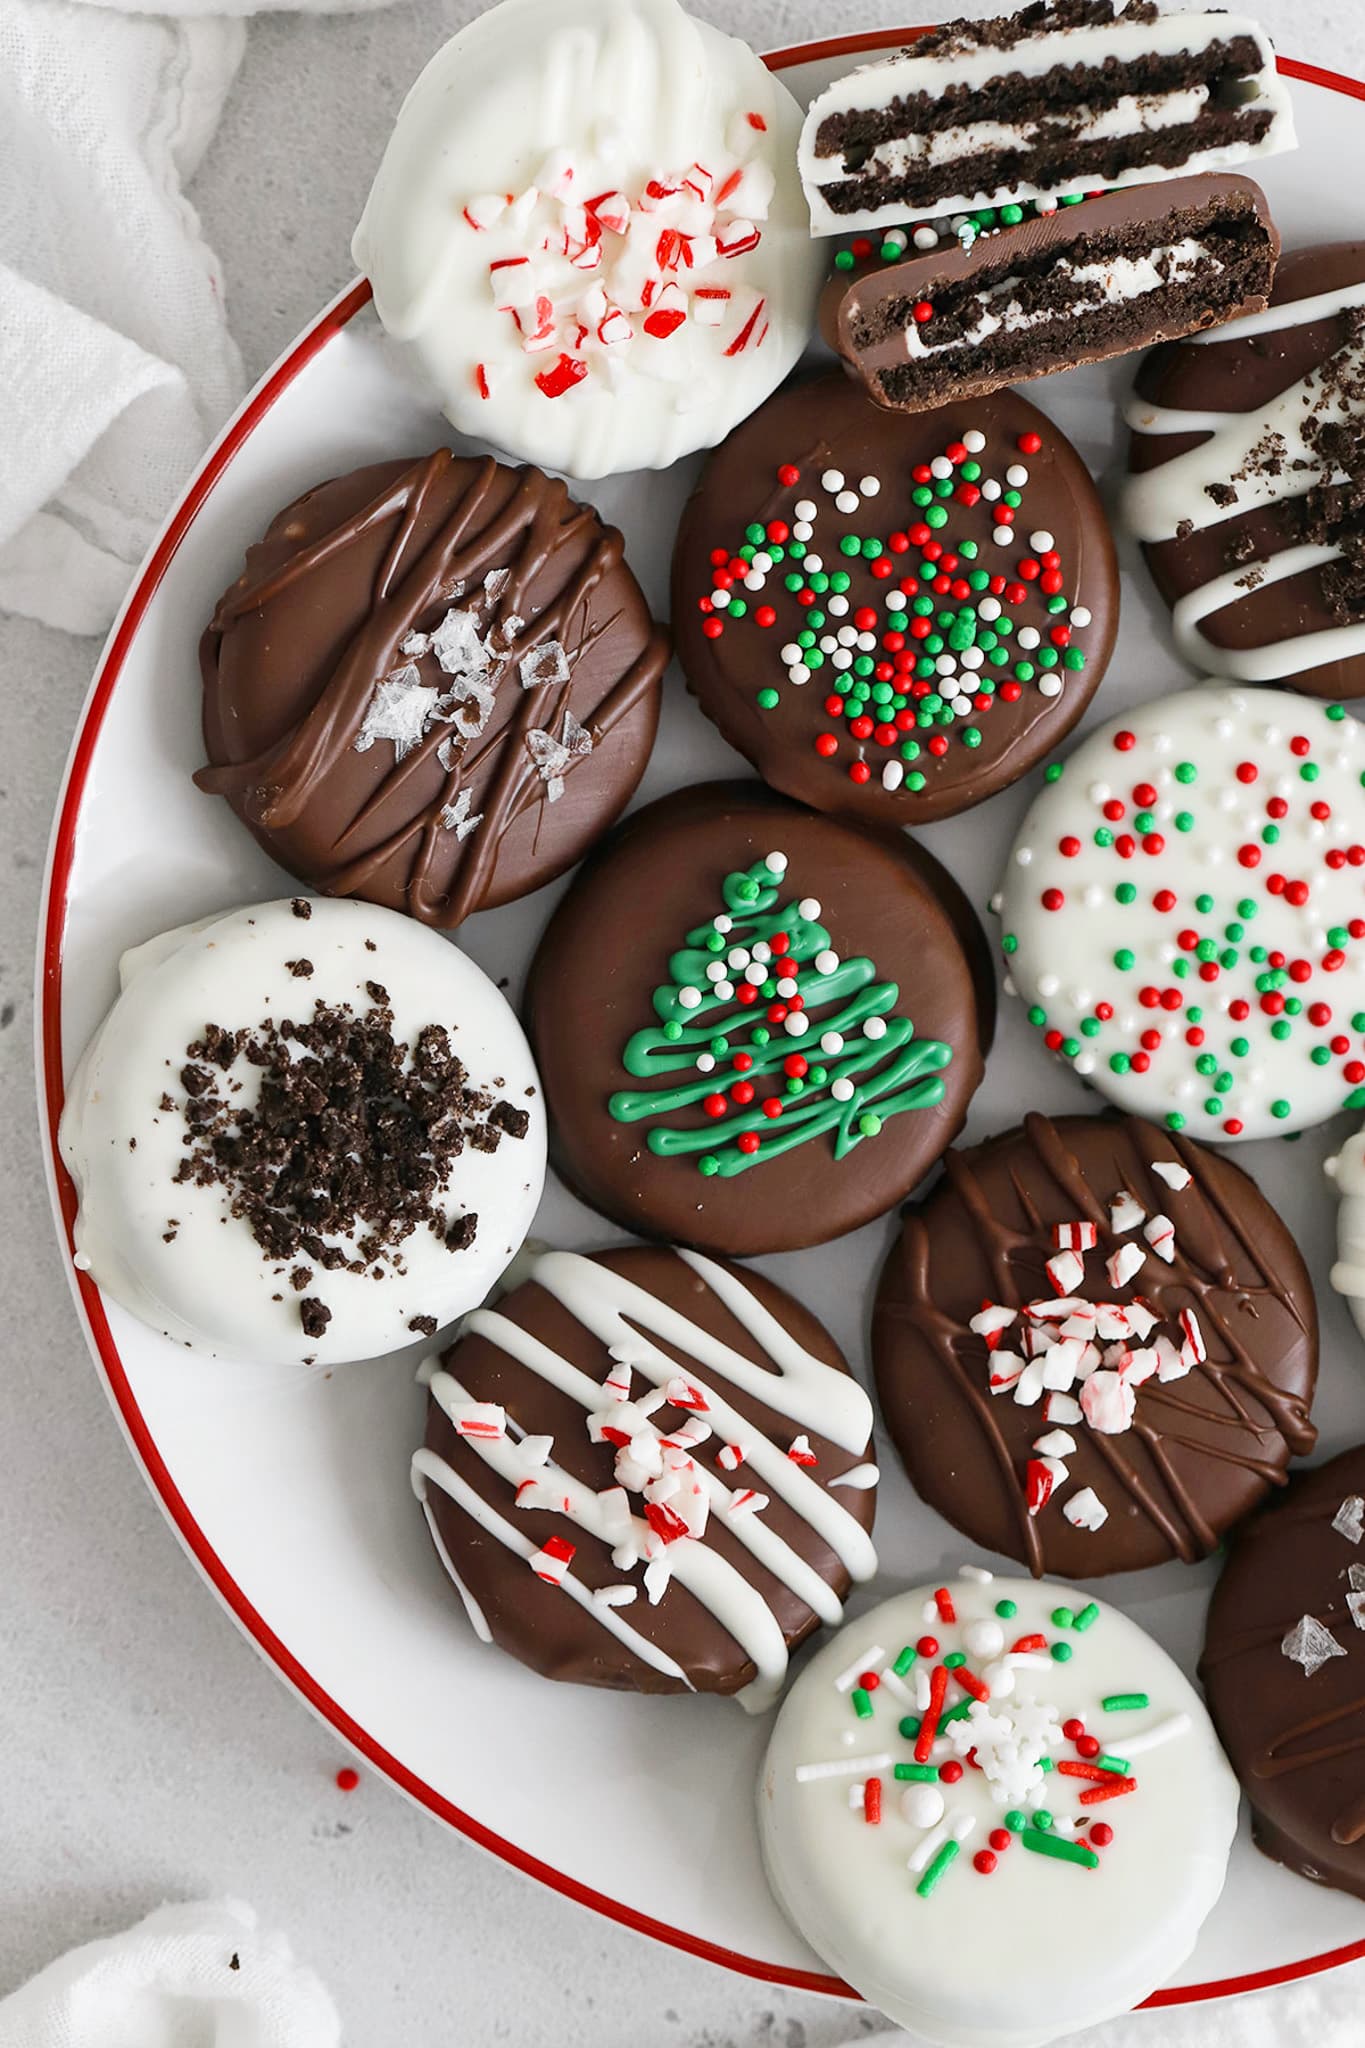 Gluten-Free Chocolate Covered Oreos decorated for Christmas